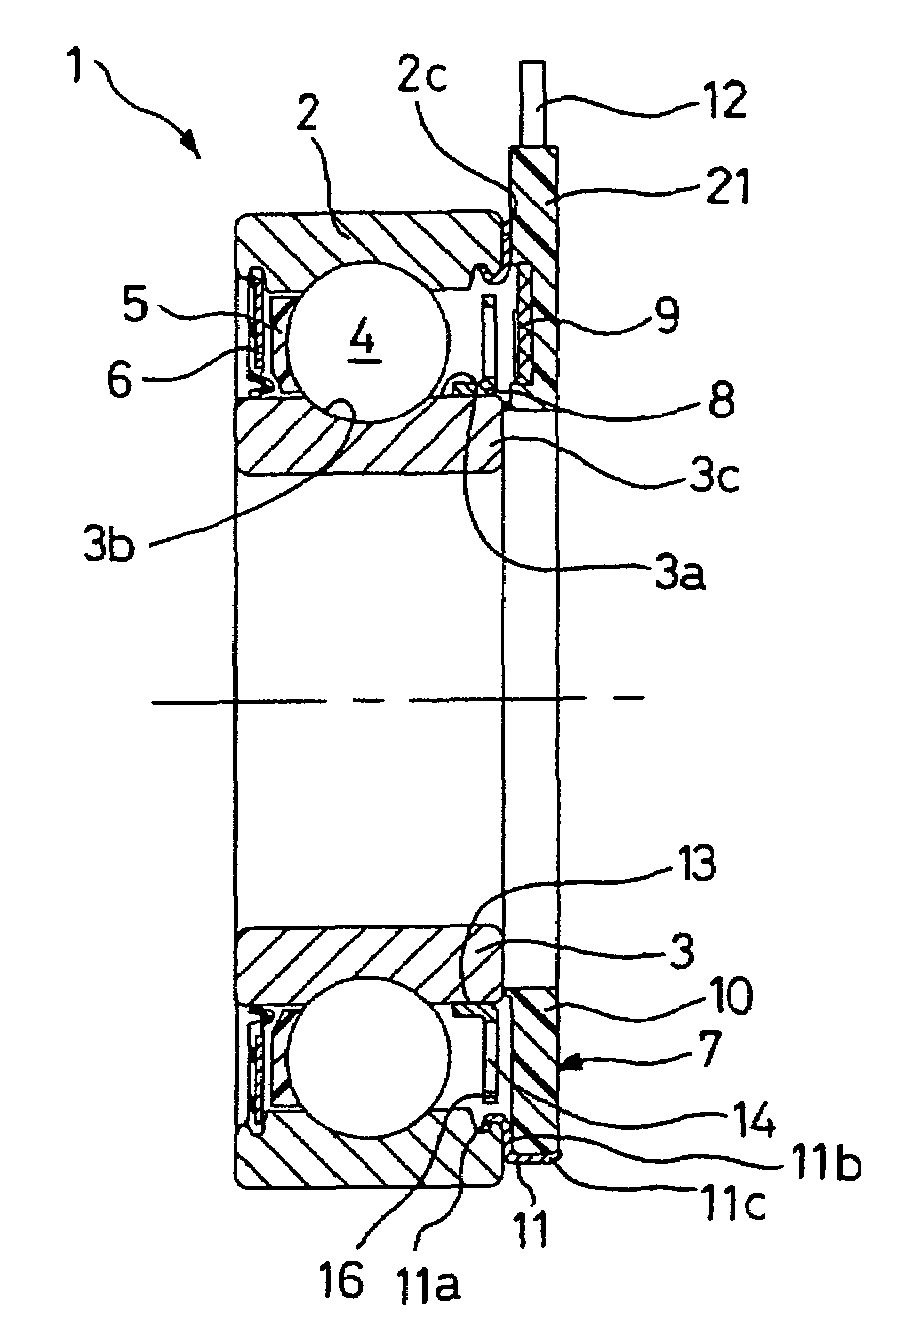 Instrumented antifriction bearing and electrical motor equipped therewith